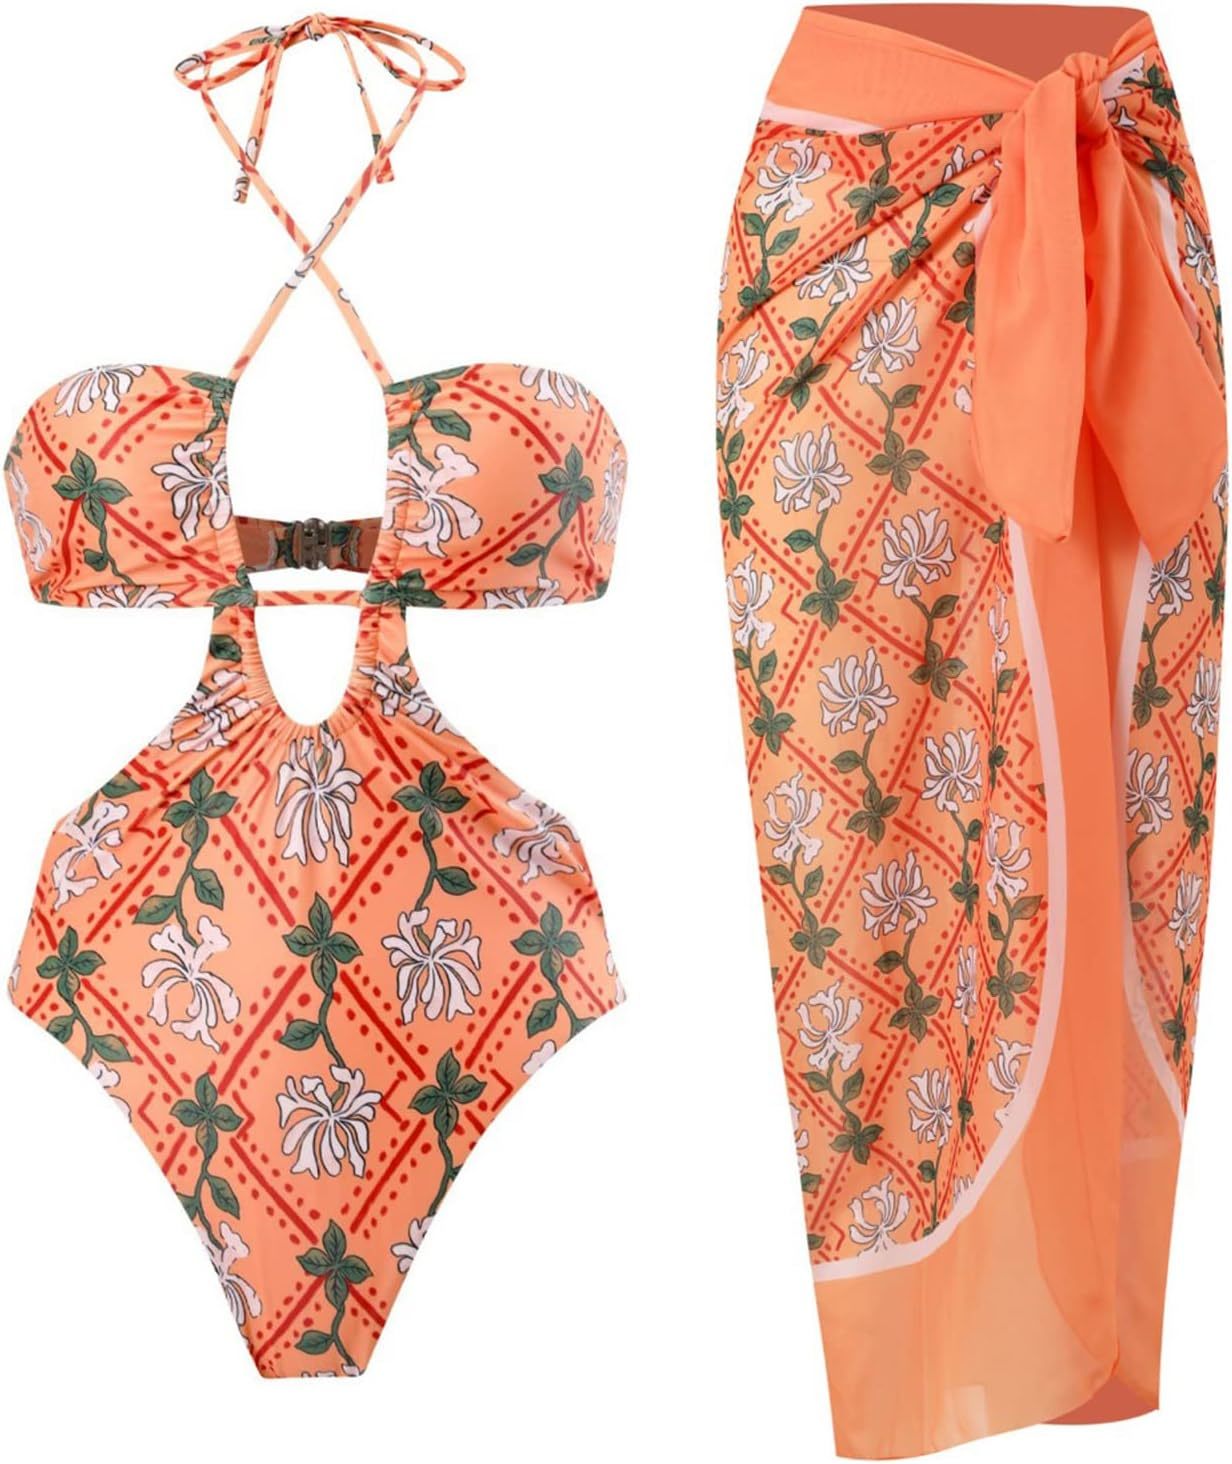 Primary image for One Piece Swimsuit with Cover up Wrap Skirt